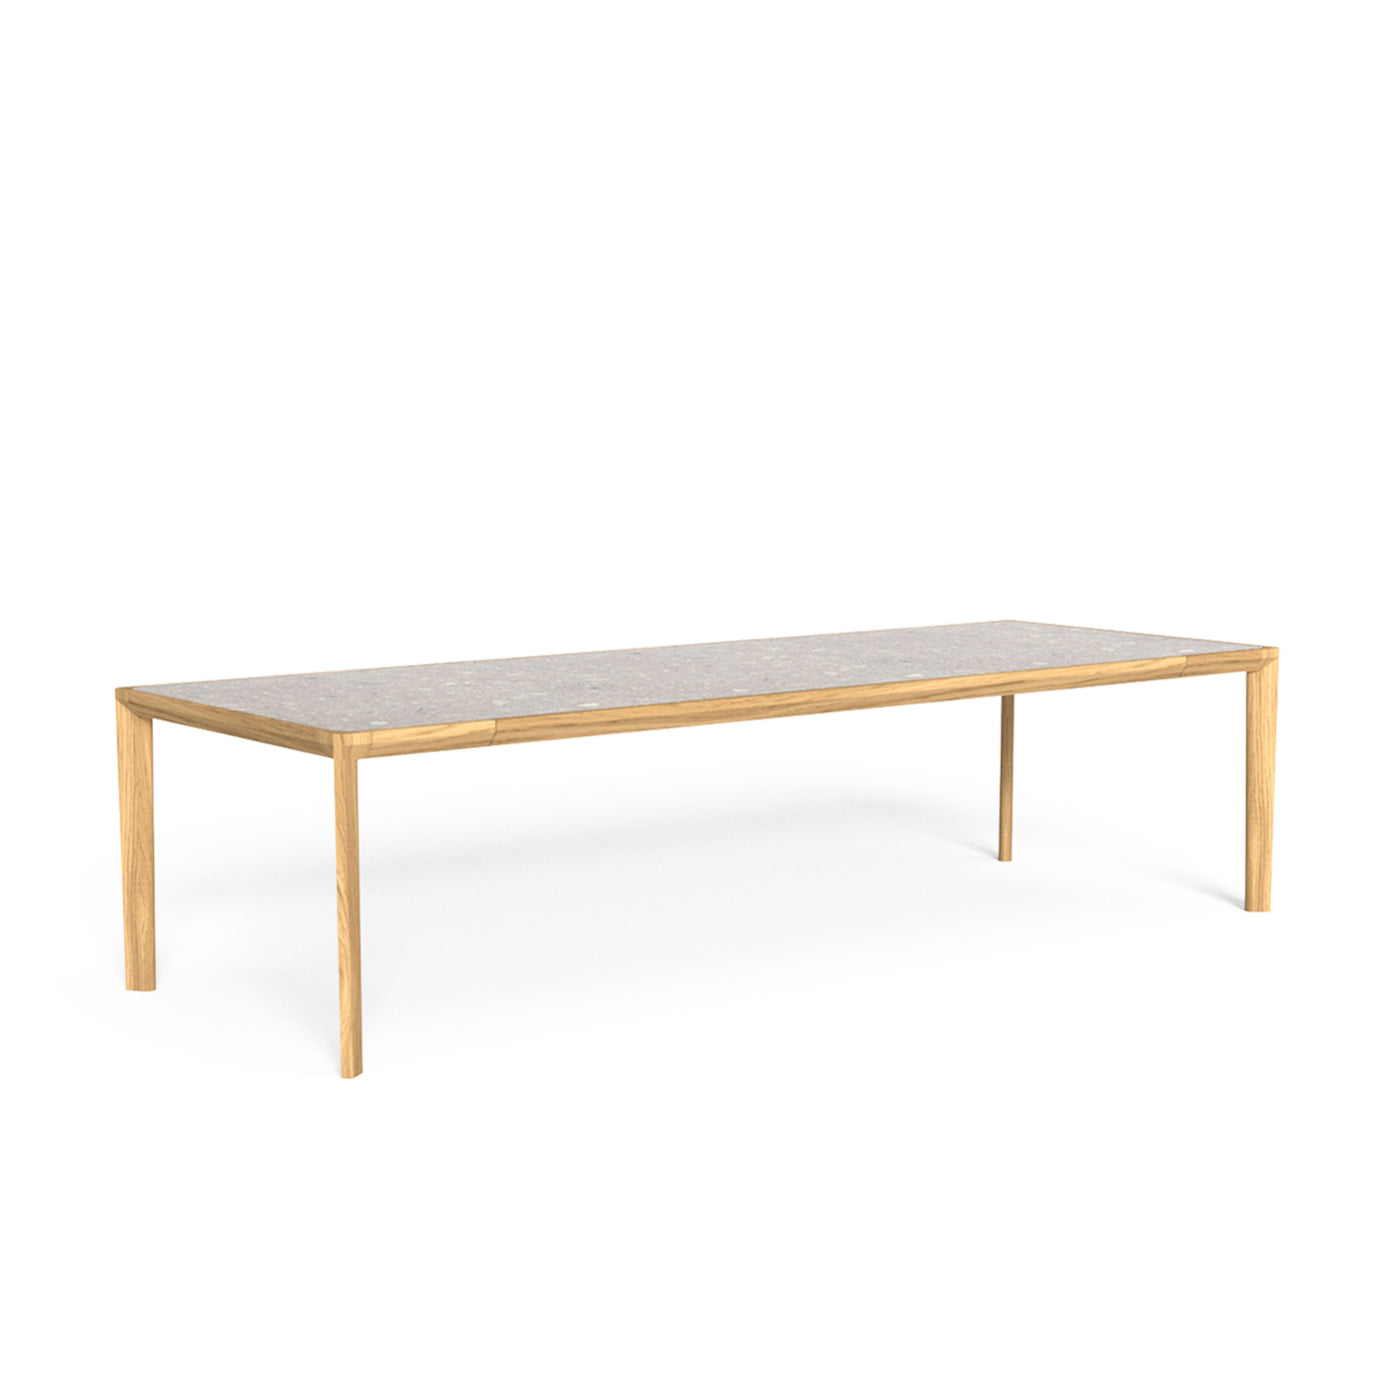 Outdoor Wood and Marble Dining Table CLEOSOFT/WOOD by Marco Acerbis for Talenti 03